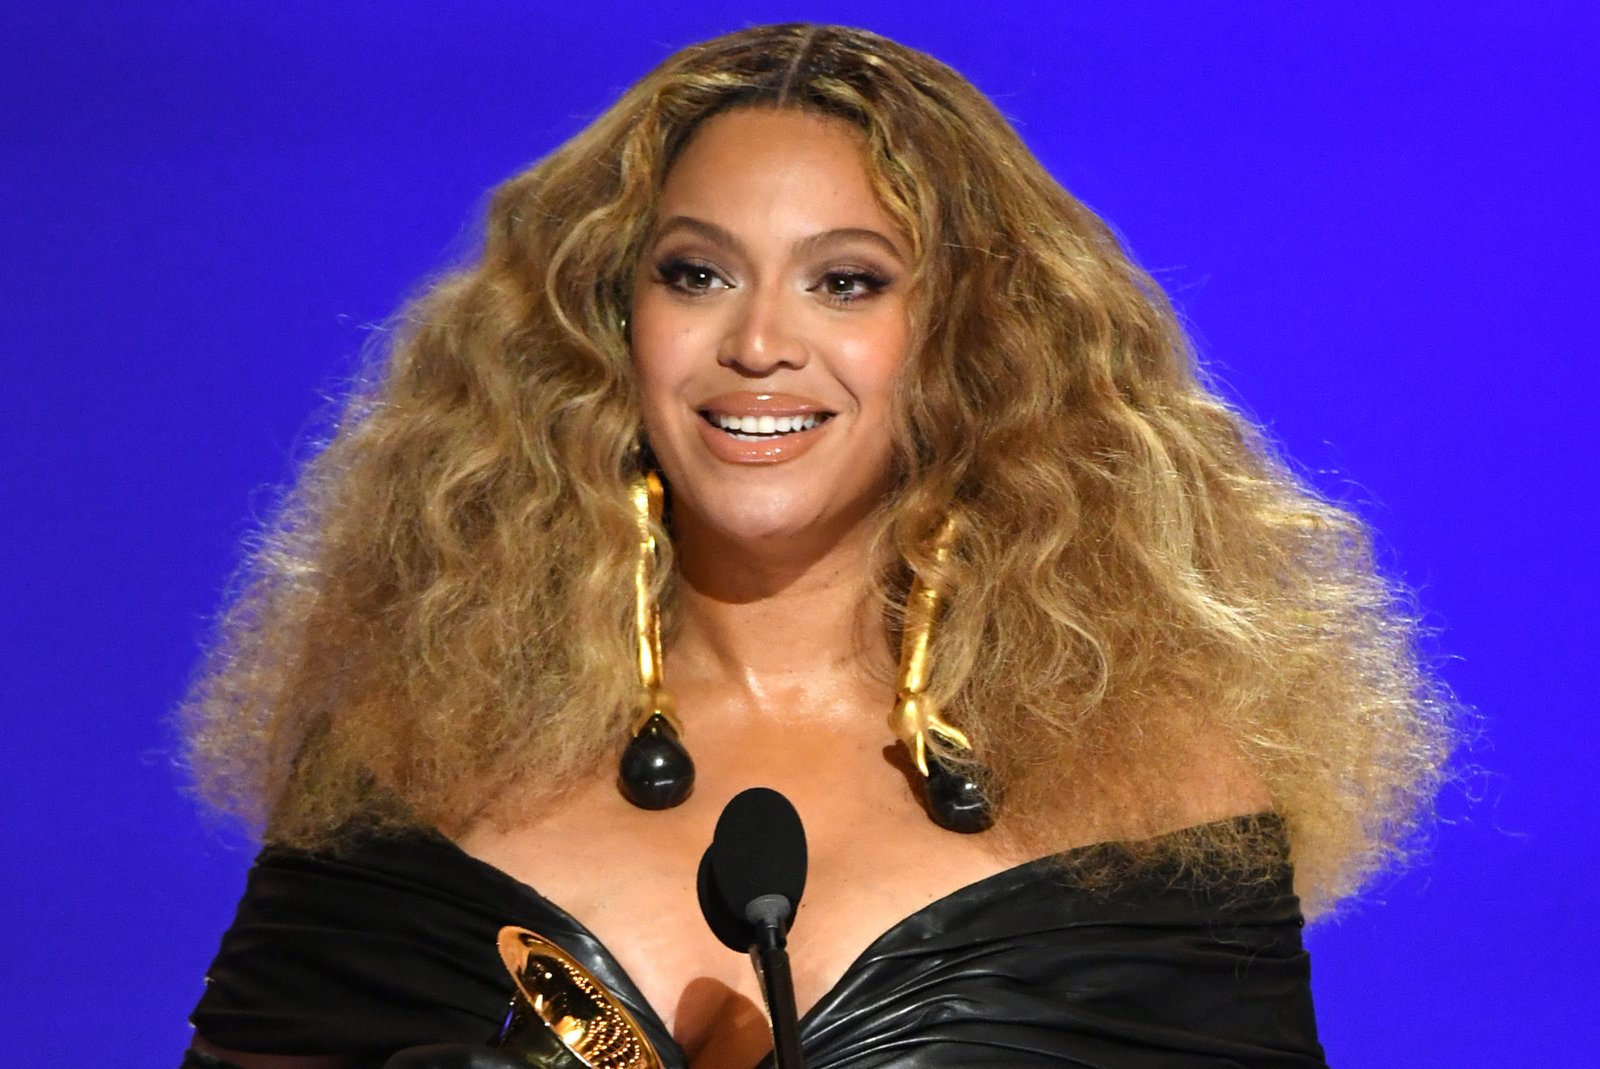 Beyoncé arrives in Italy before Kourtney Kardashian and Travis Barker’s marriage ceremony